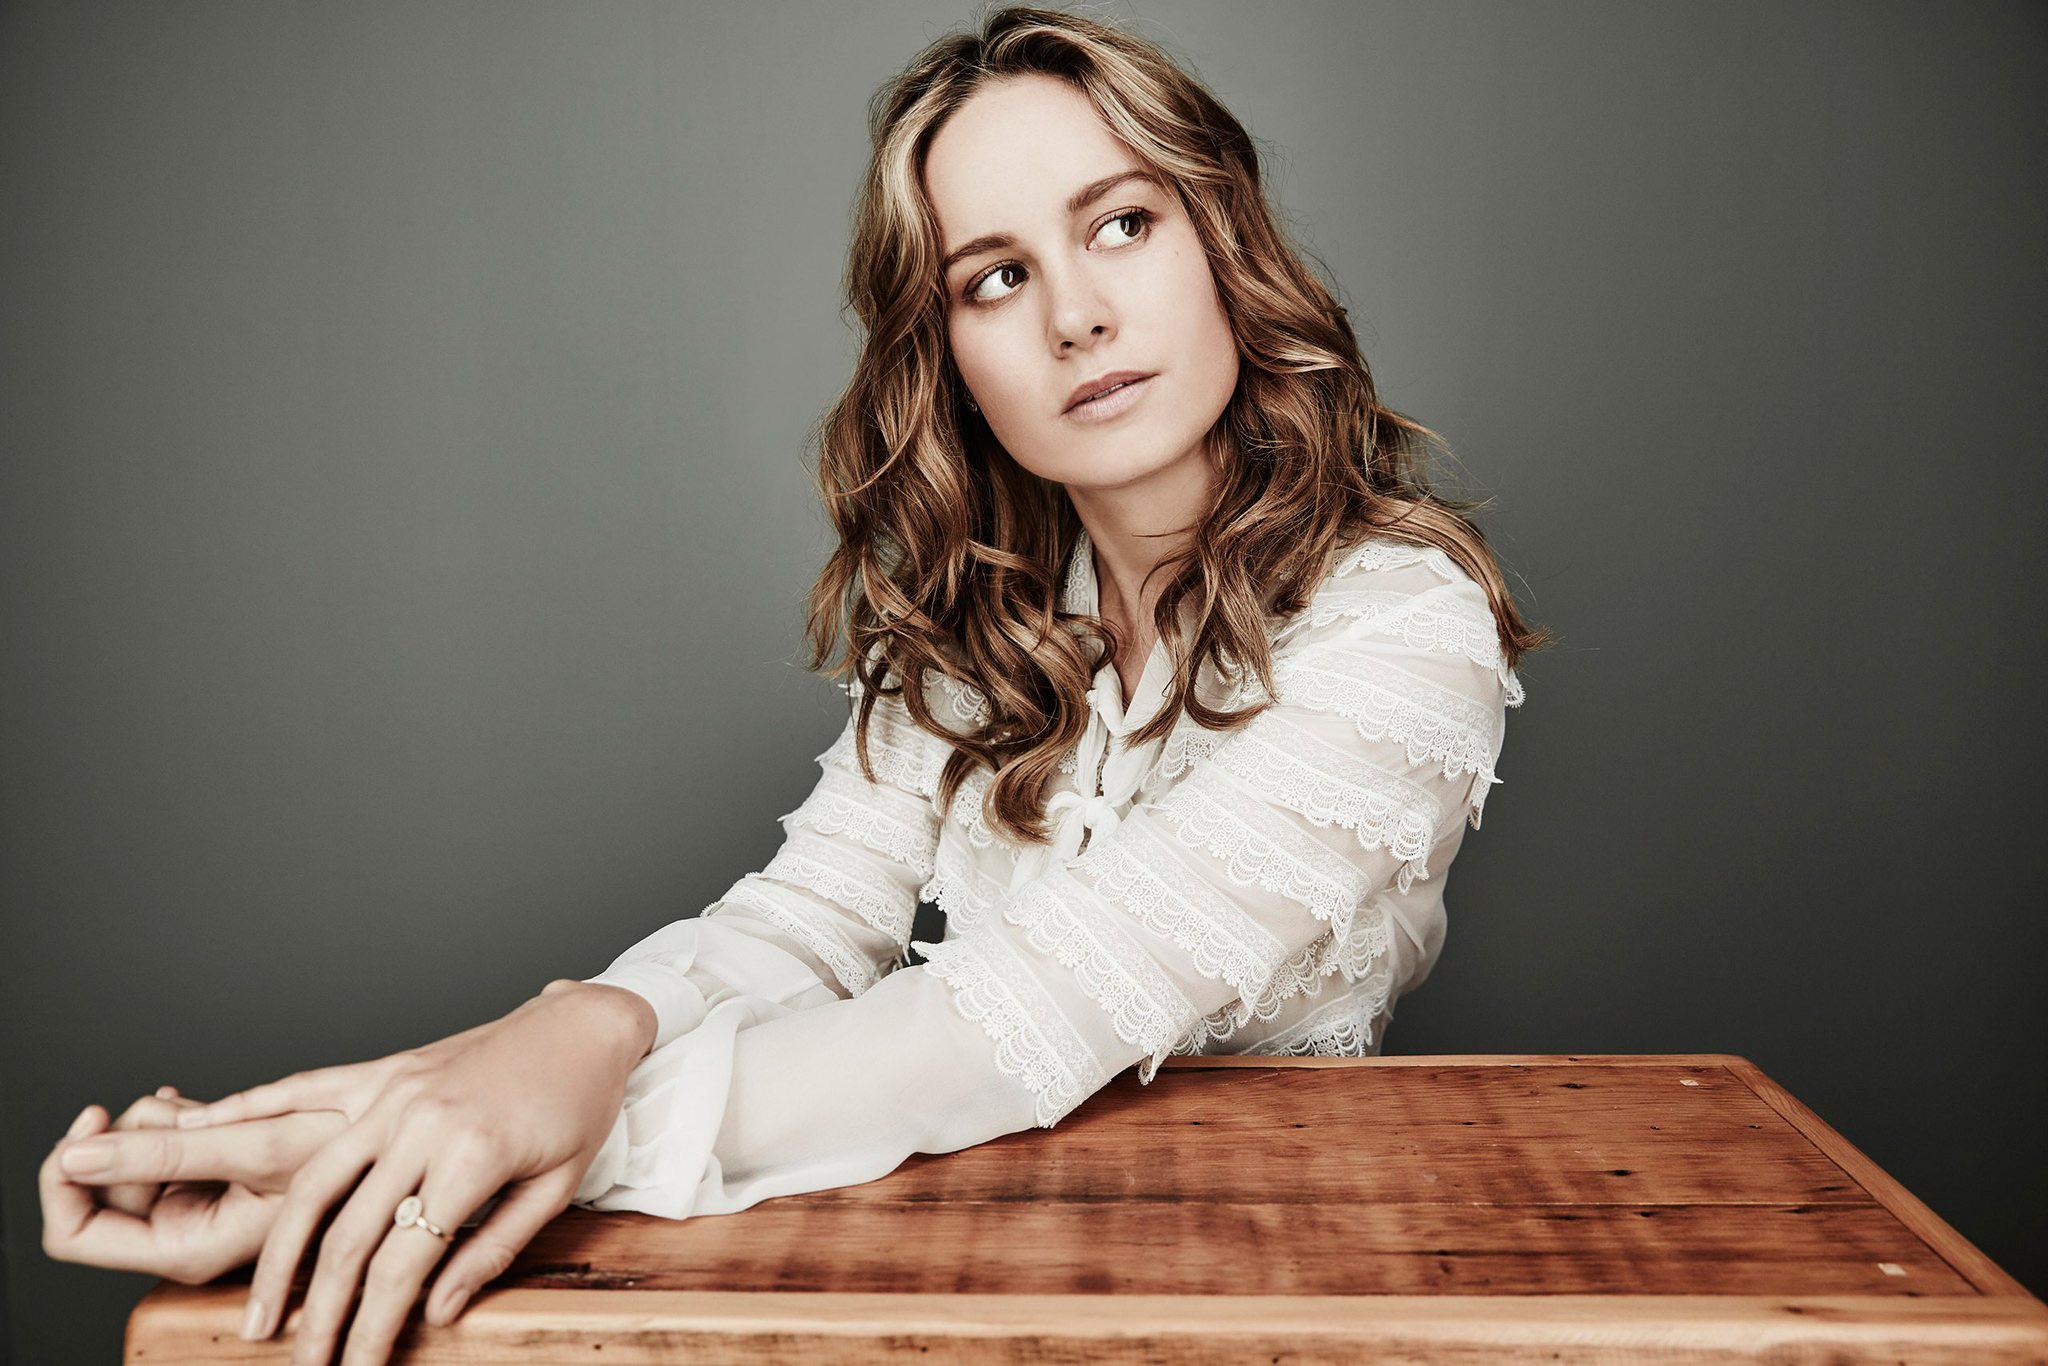 Mmmm... be my Brie Larson for me and give me a lovely, lovely...!